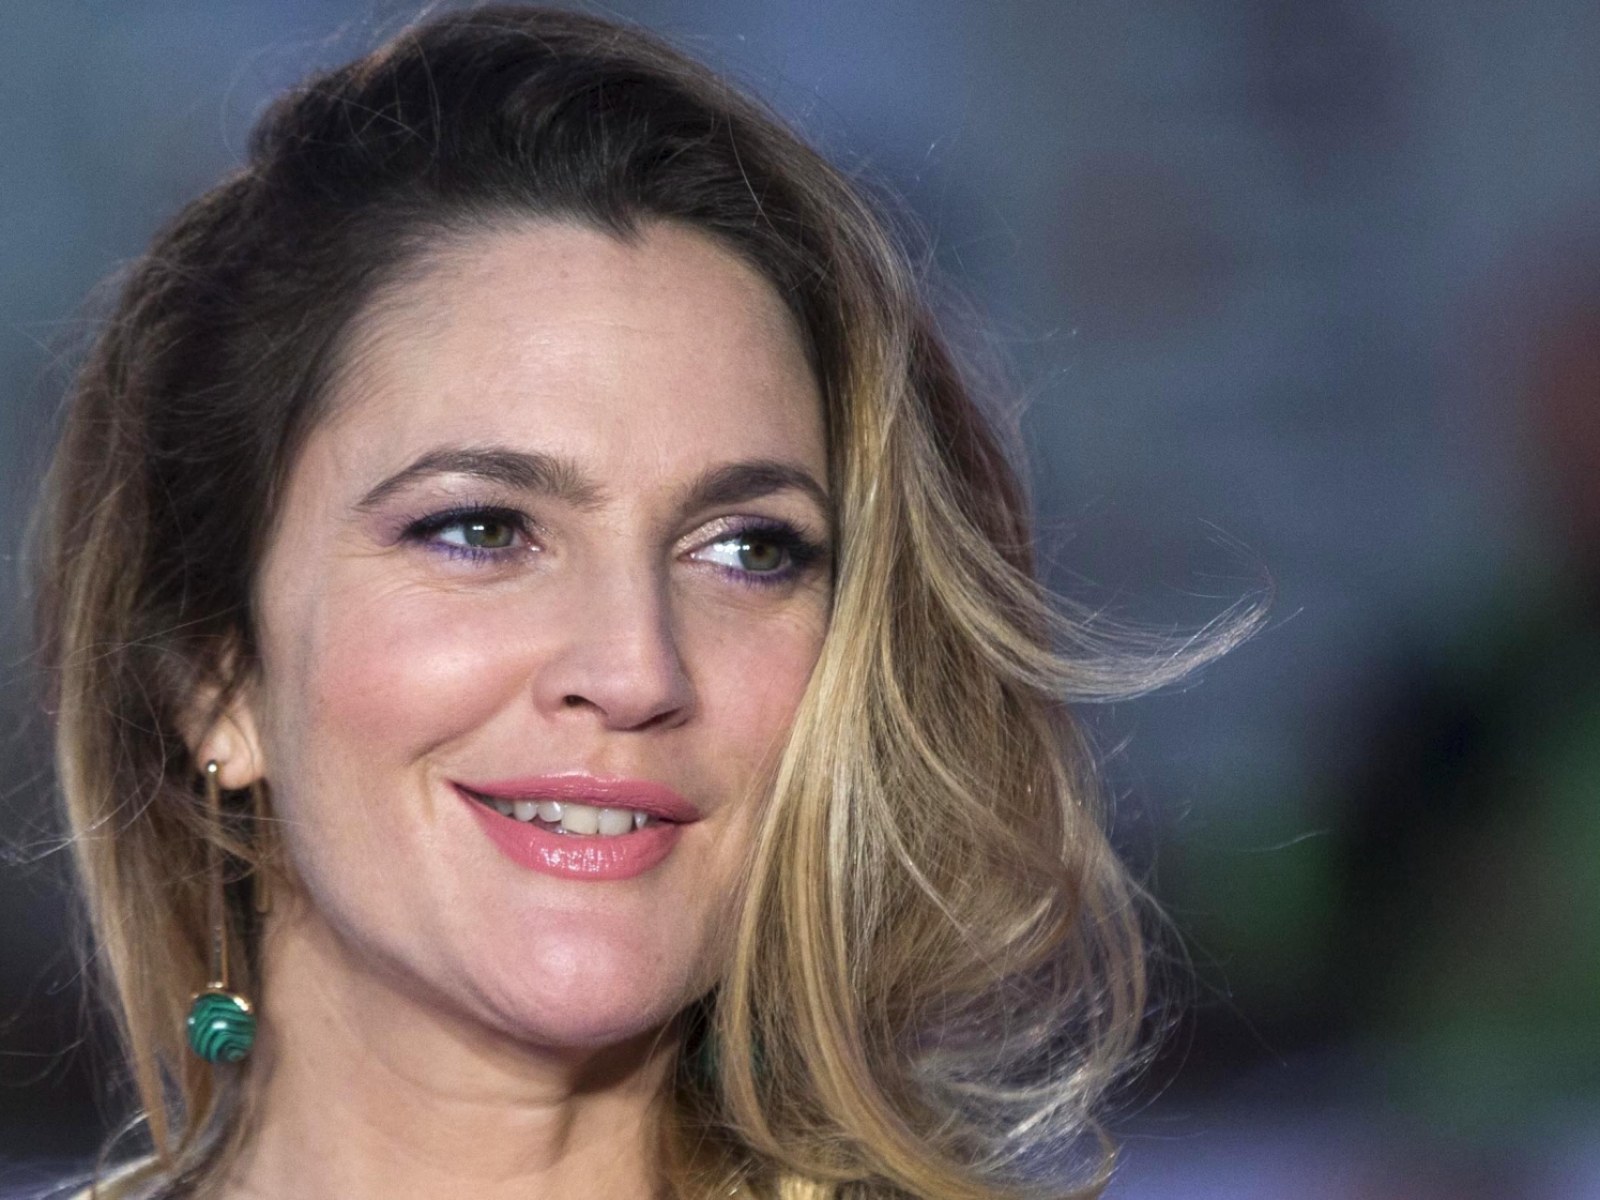 Drew Barrymore warns paparazzi not to mess with her kids, breaks down during interview